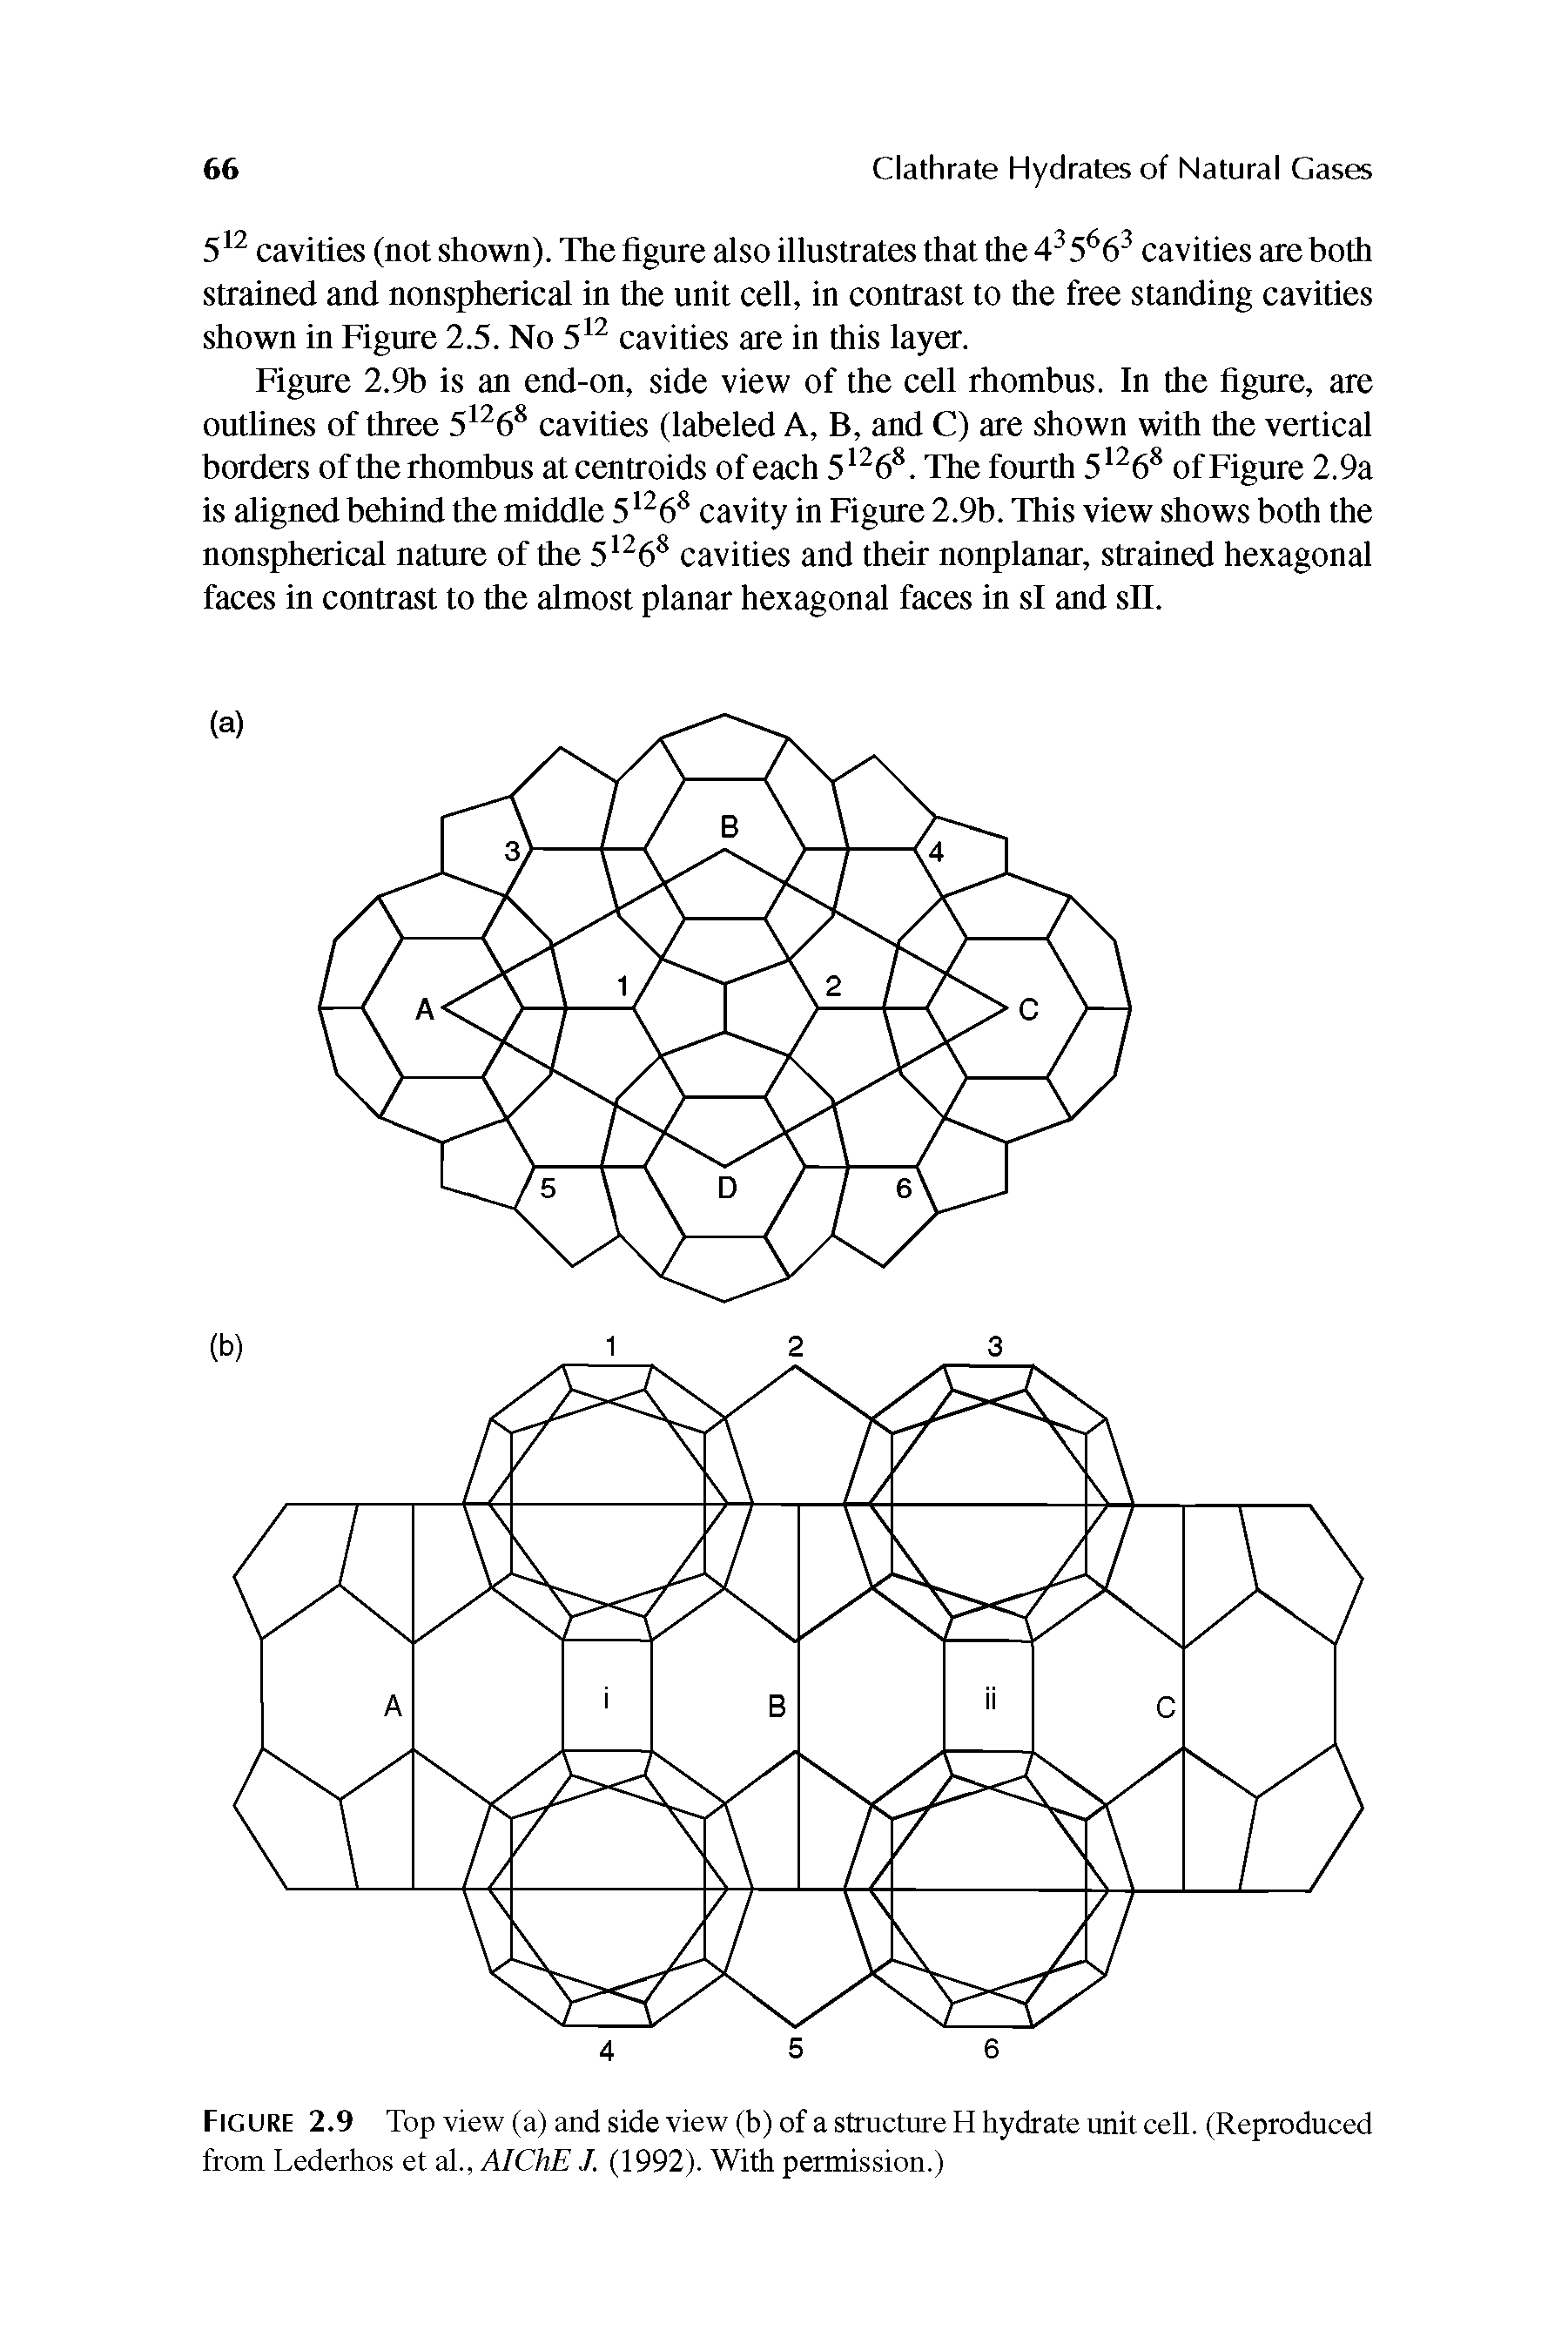 Figure 2.9b is an end-on, side view of the cell rhombus. In the figure, are outlines of three 51268 cavities (labeled A, B, and C) are shown with the vertical borders of the rhombus at centroids of each 51268. The fourth 51268 of Figure 2.9a is aligned behind the middle 51268 cavity in Figure 2.9b. This view shows both the nonspherical nature of the 51268 cavities and their nonplanar, strained hexagonal faces in contrast to the almost planar hexagonal faces in si and sll.